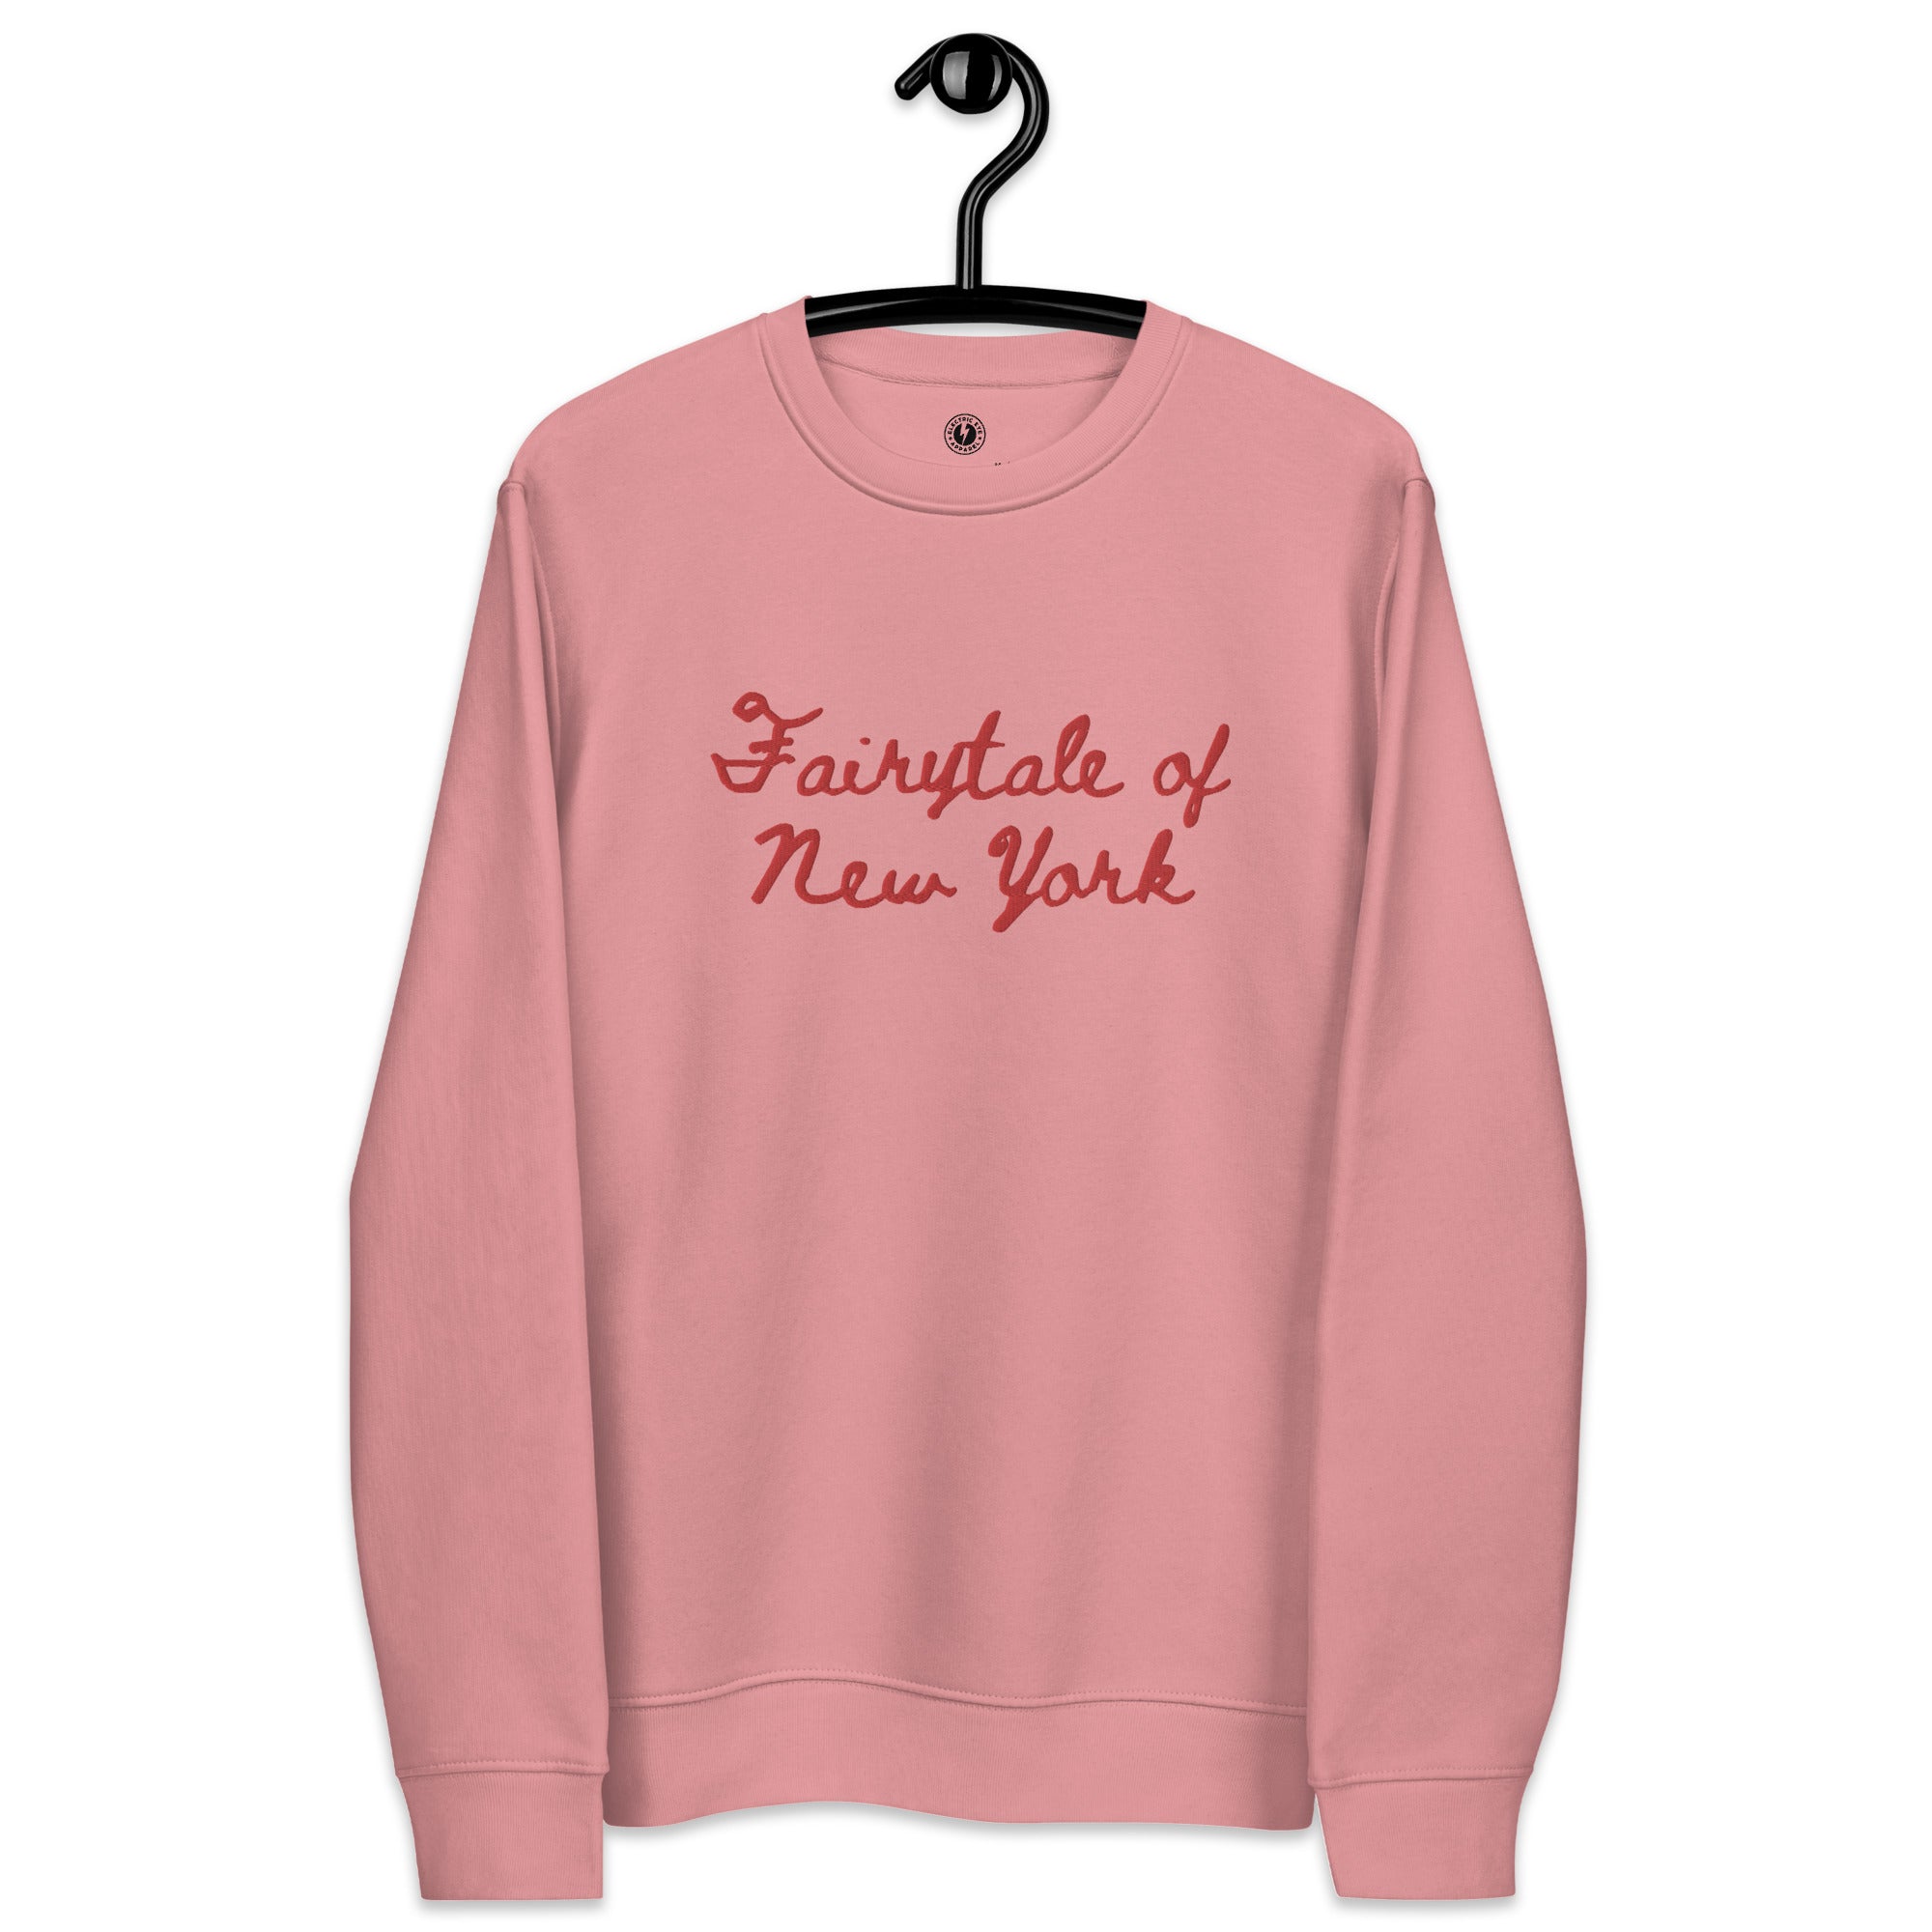 Fairytale of New York Embroidered Unisex organic cotton sweatshirt - red embroidery